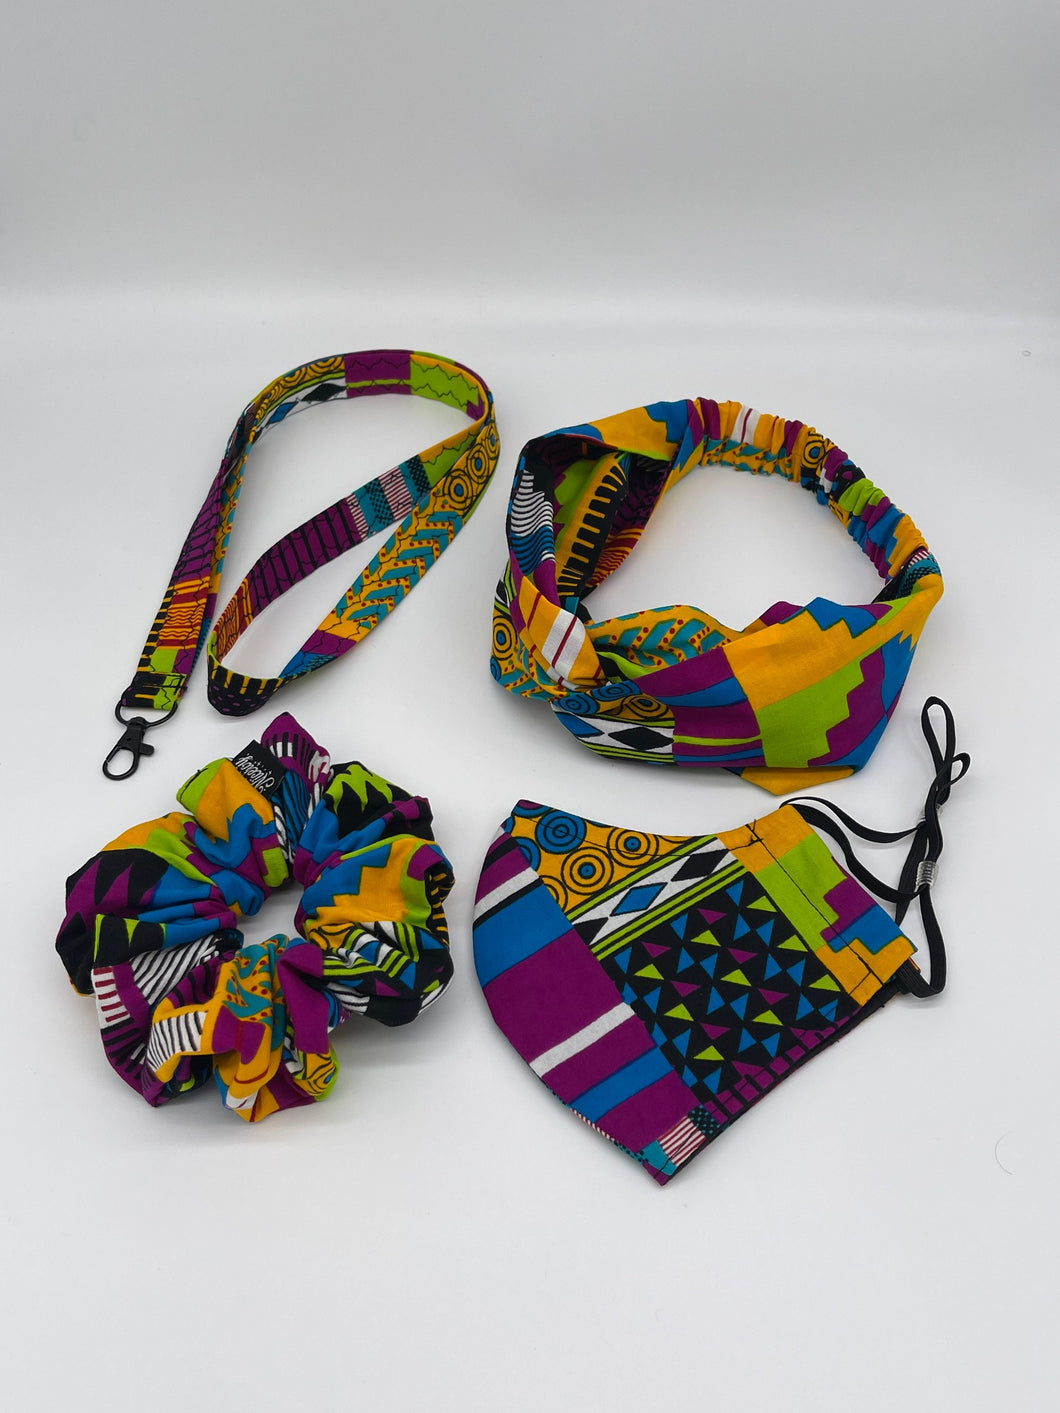 Niceroy kente Cotton fabric headband, Mask, lanyard and scrunchies gift set, gift for a friend, for her, for mom